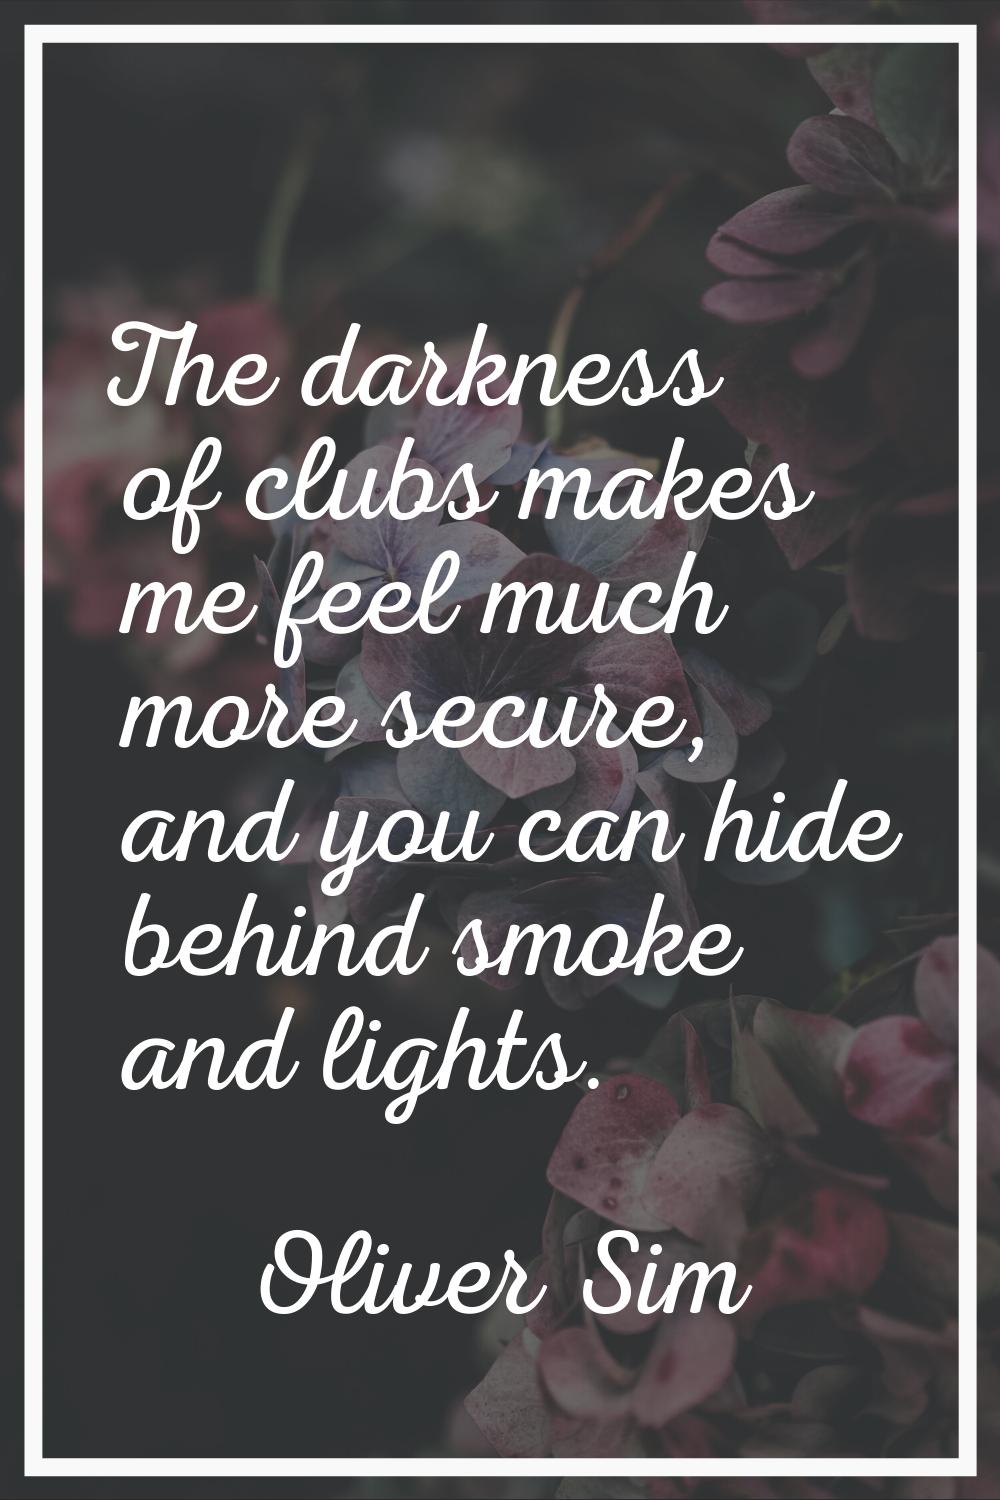 The darkness of clubs makes me feel much more secure, and you can hide behind smoke and lights.